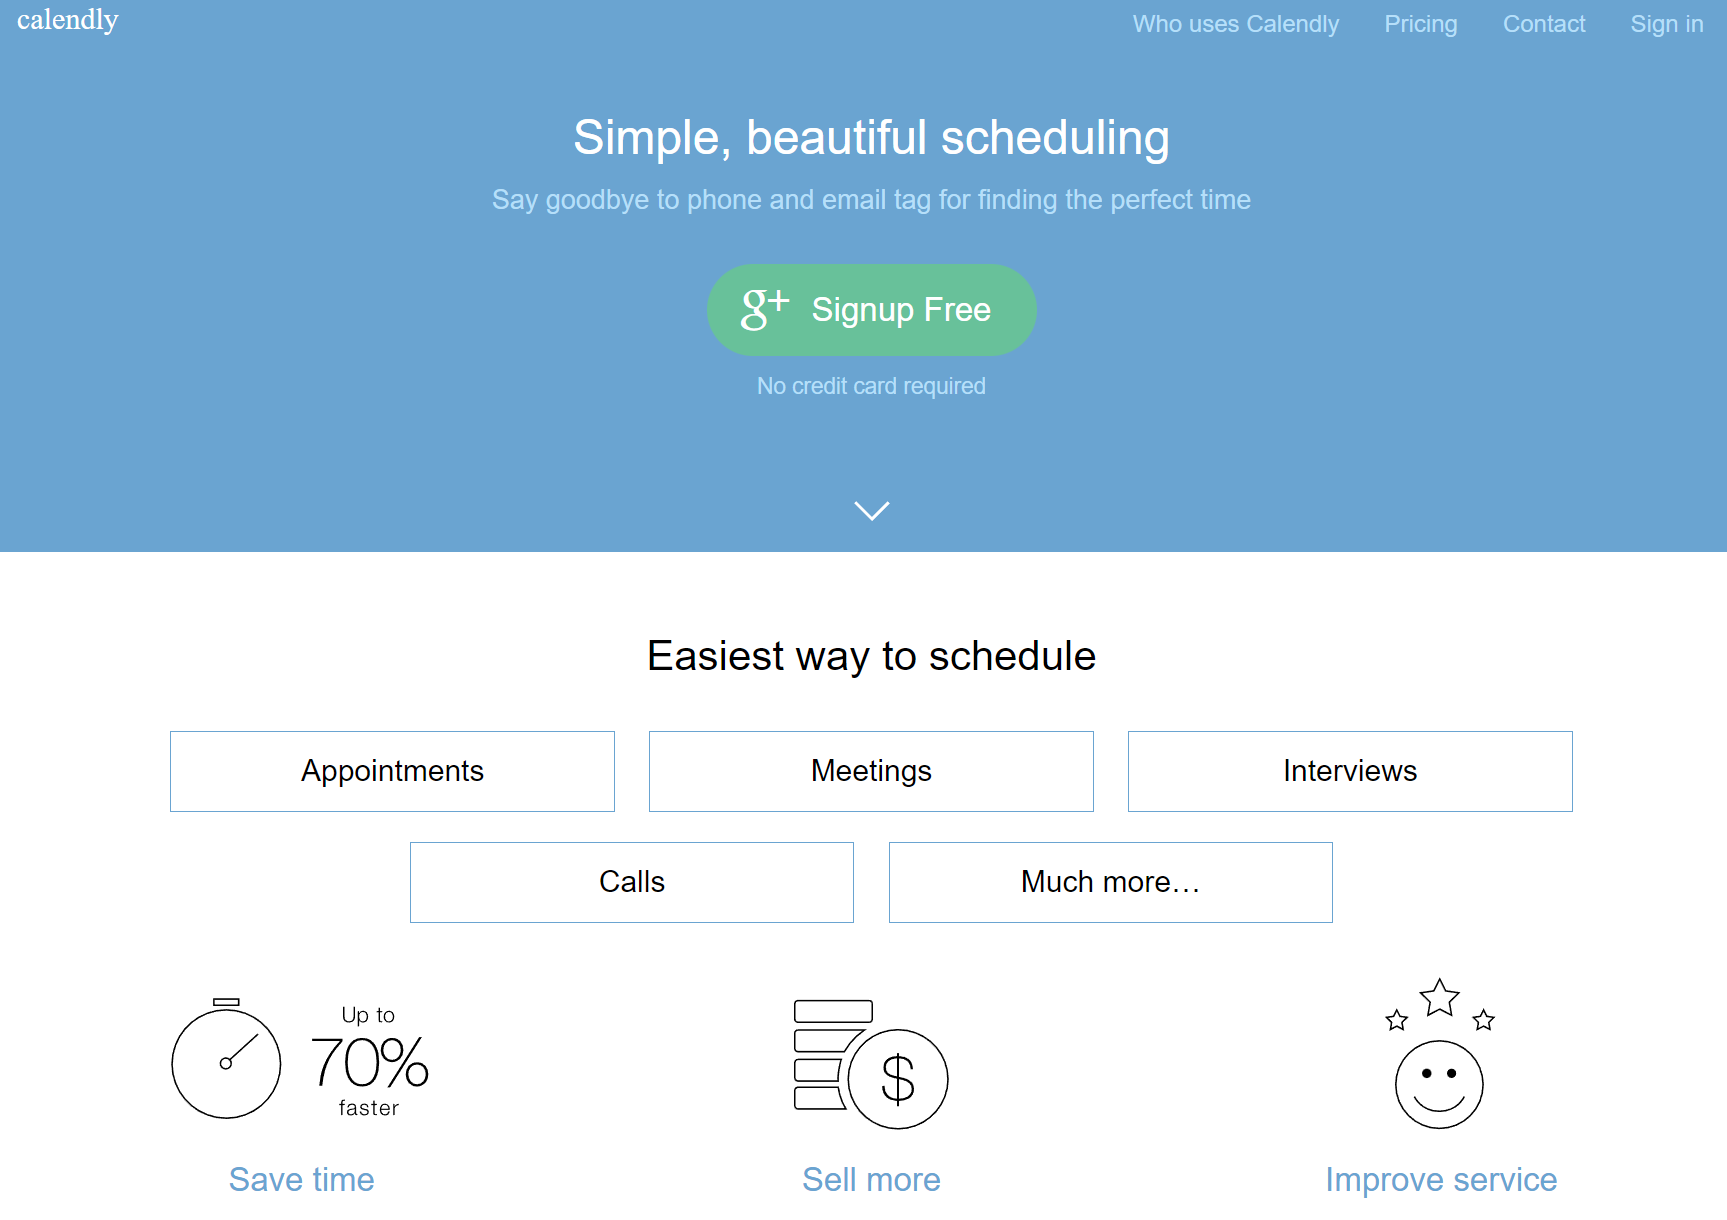 calendly's 2015 landing page